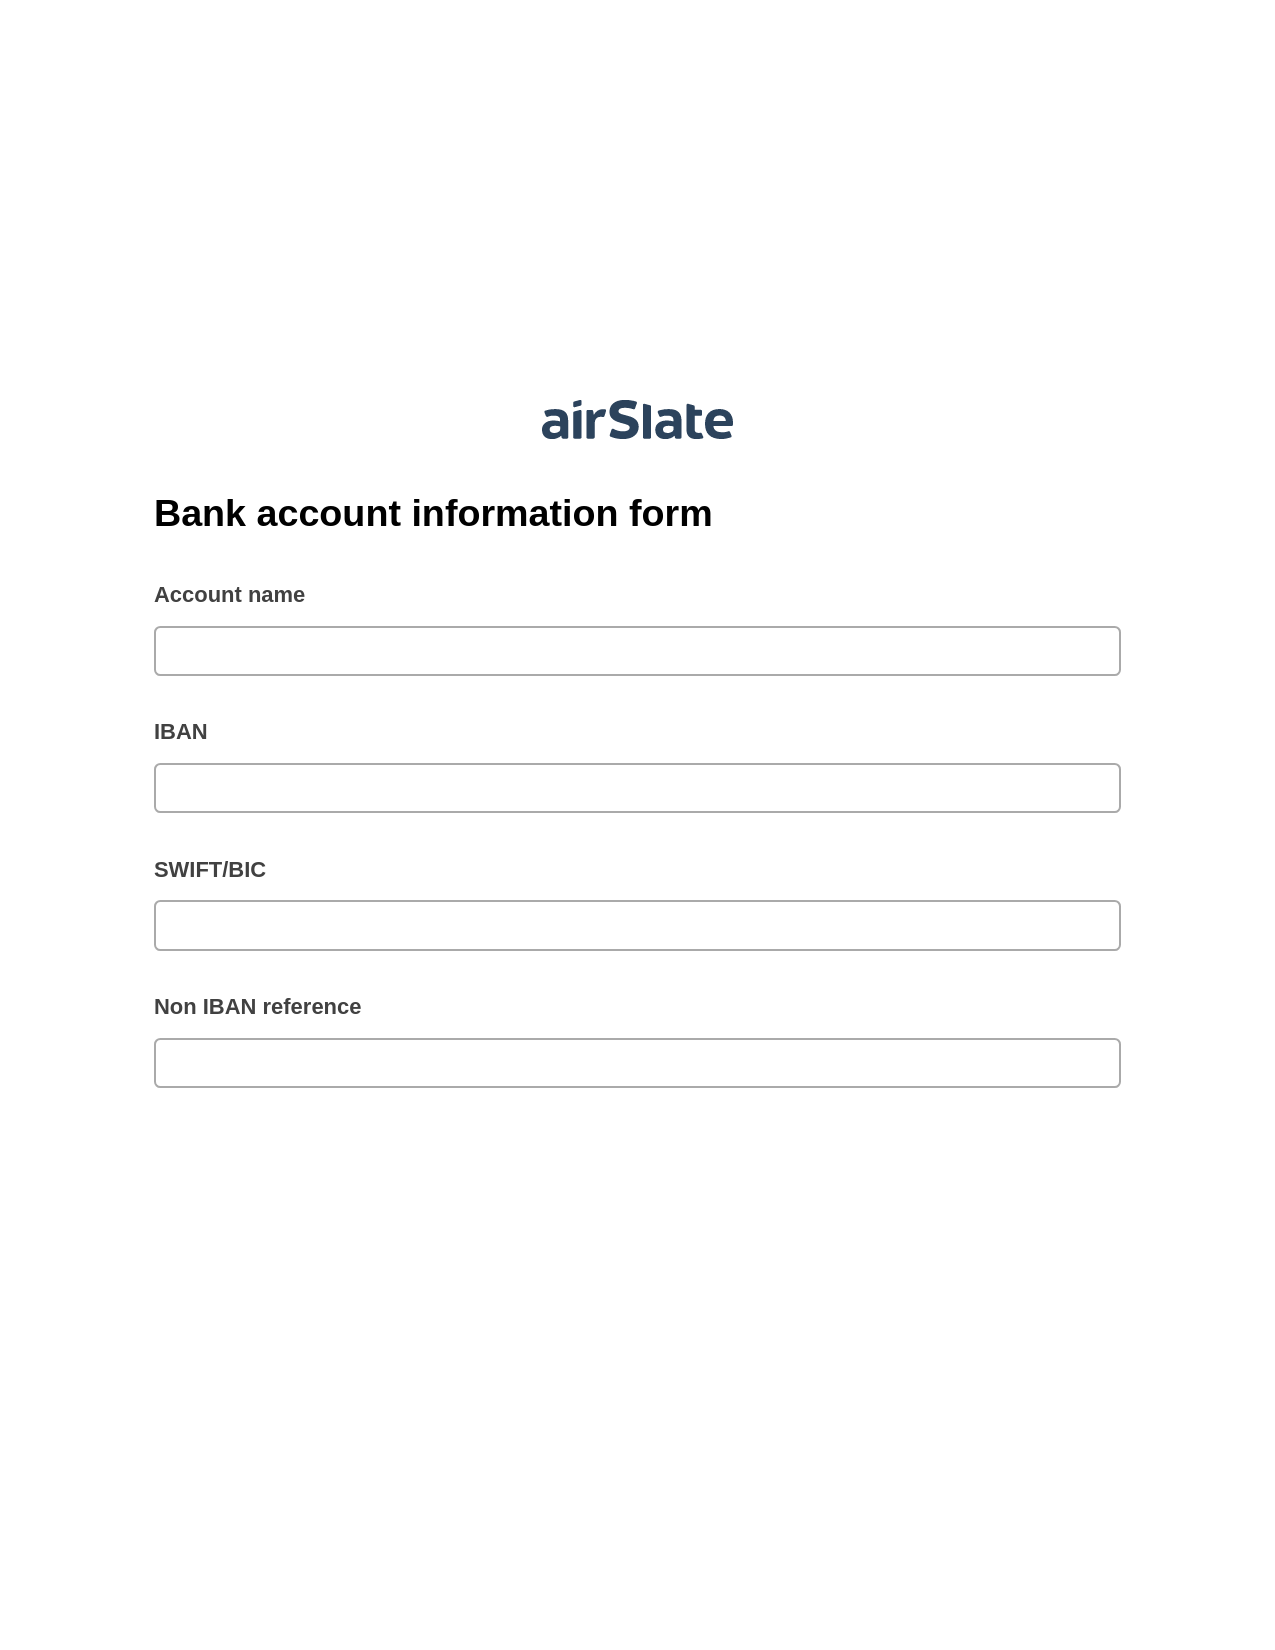 Bank account information form Pre-fill from CSV File Dropdown Options Bot, Mailchimp add recipient to audience Bot, Archive to SharePoint Folder Bot